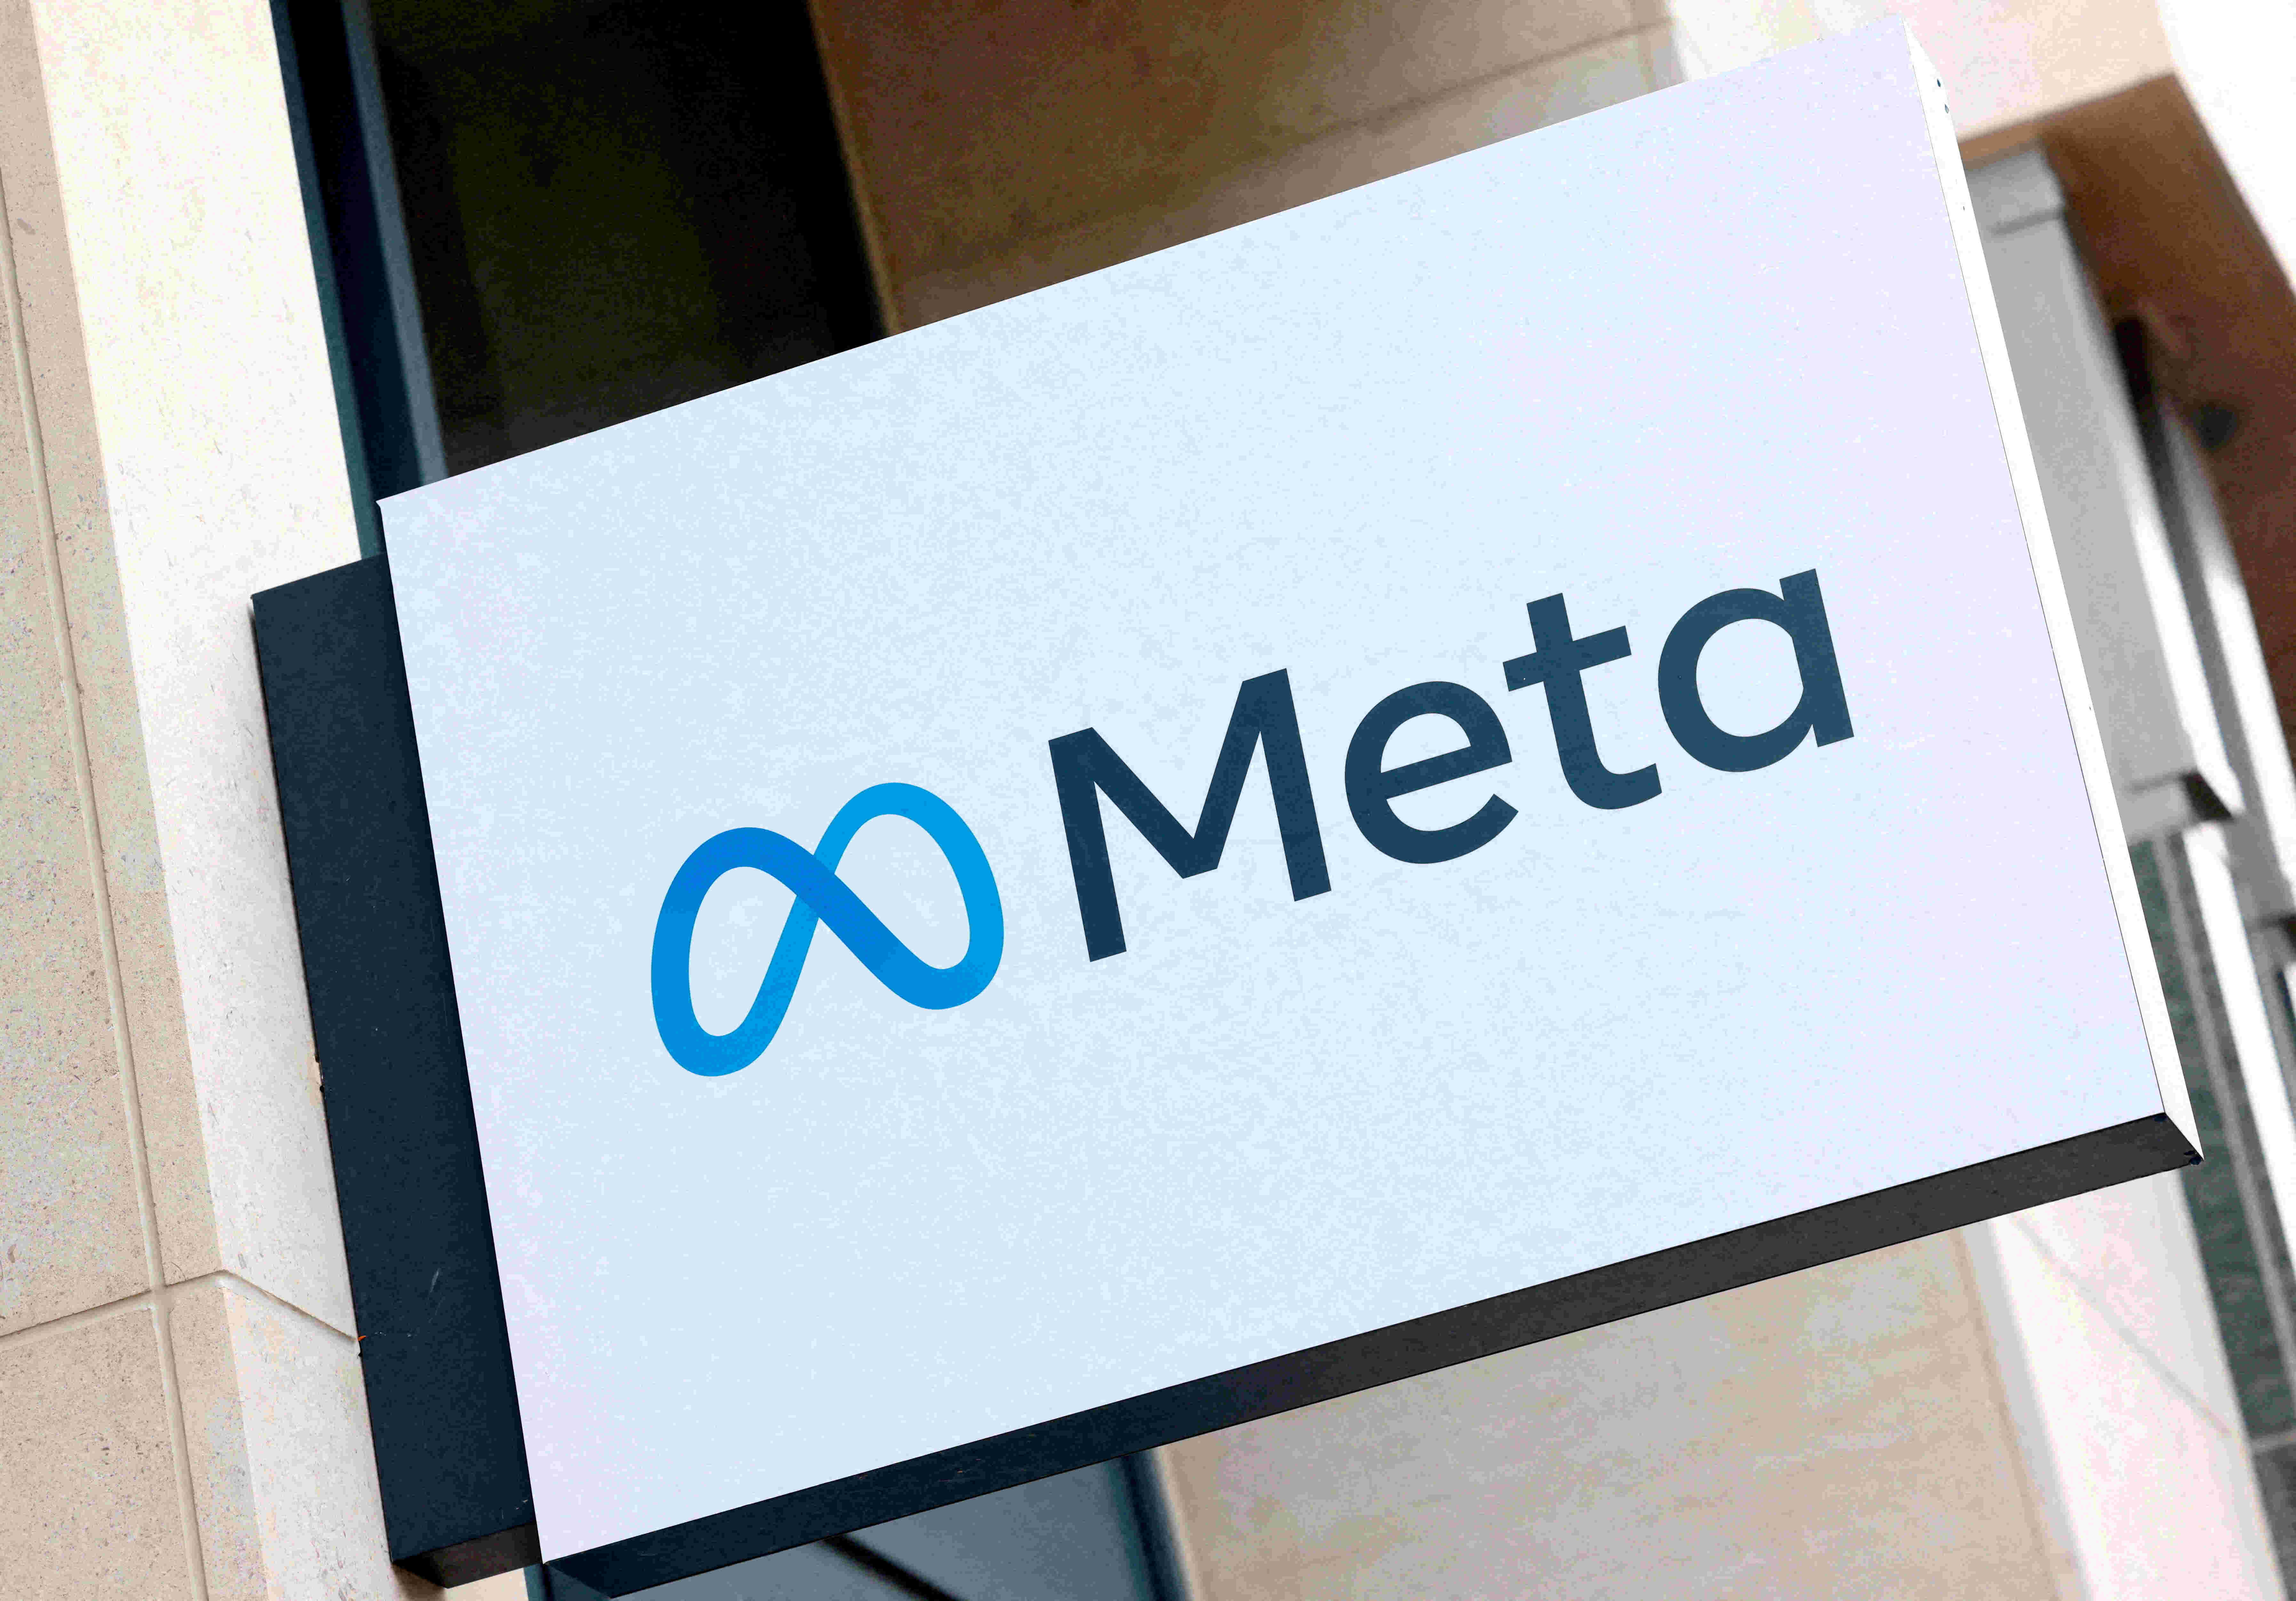 Chromecast Meta Quest News: Meta discontinues Chromecast feature from Quest VR headsets